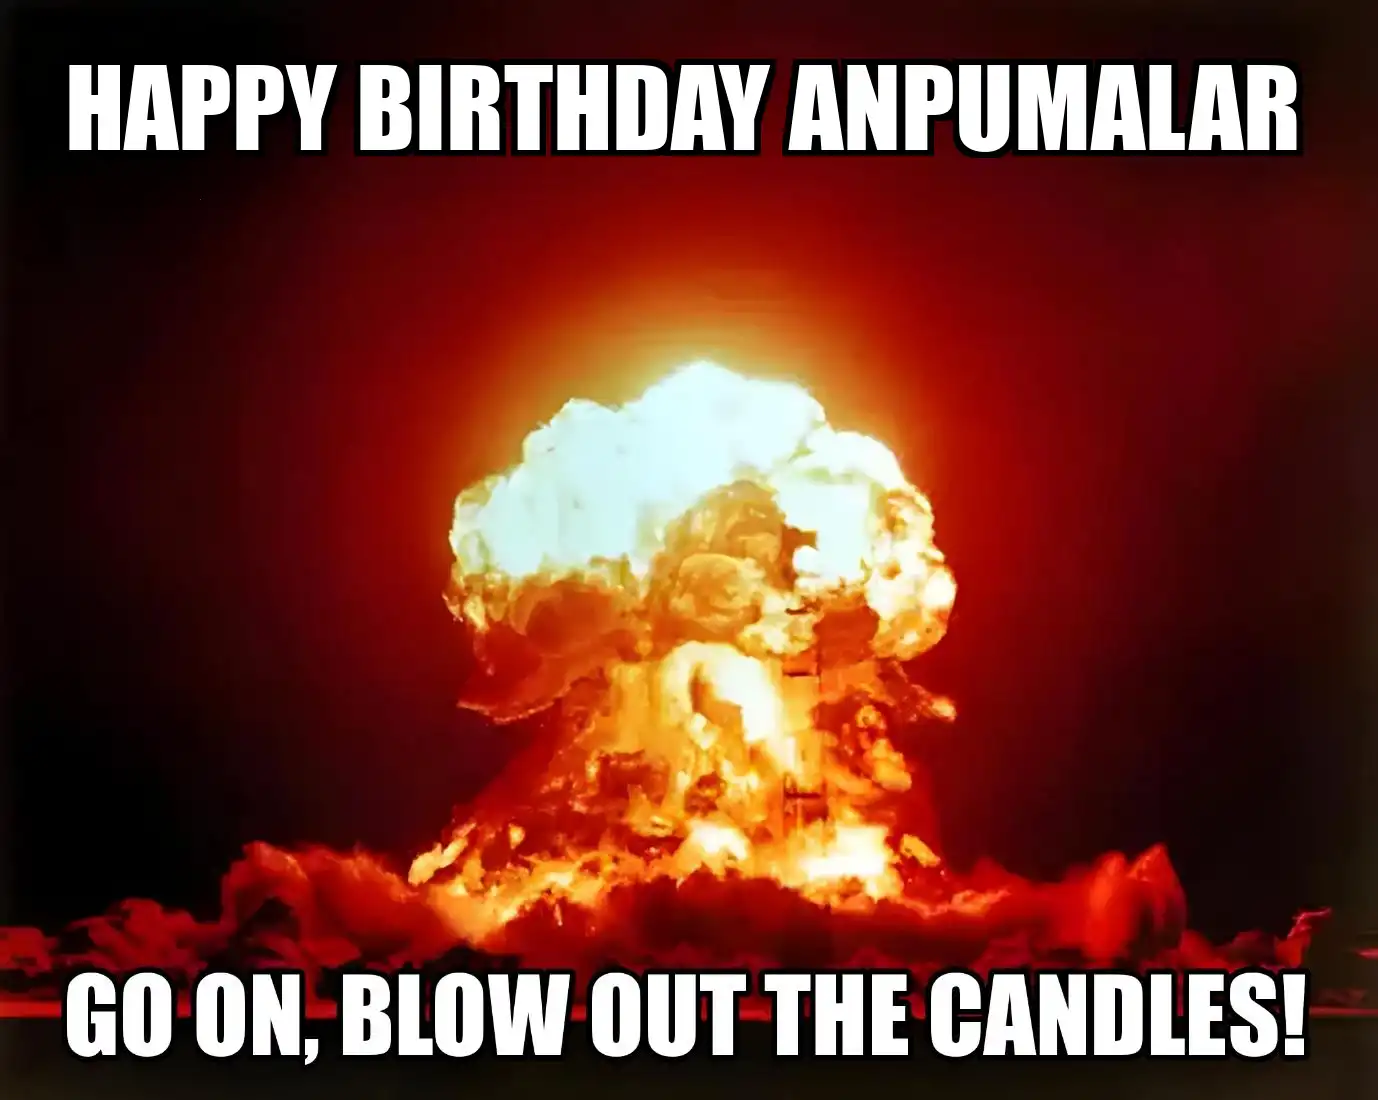 Happy Birthday Anpumalar Go On Blow Out The Candles Meme